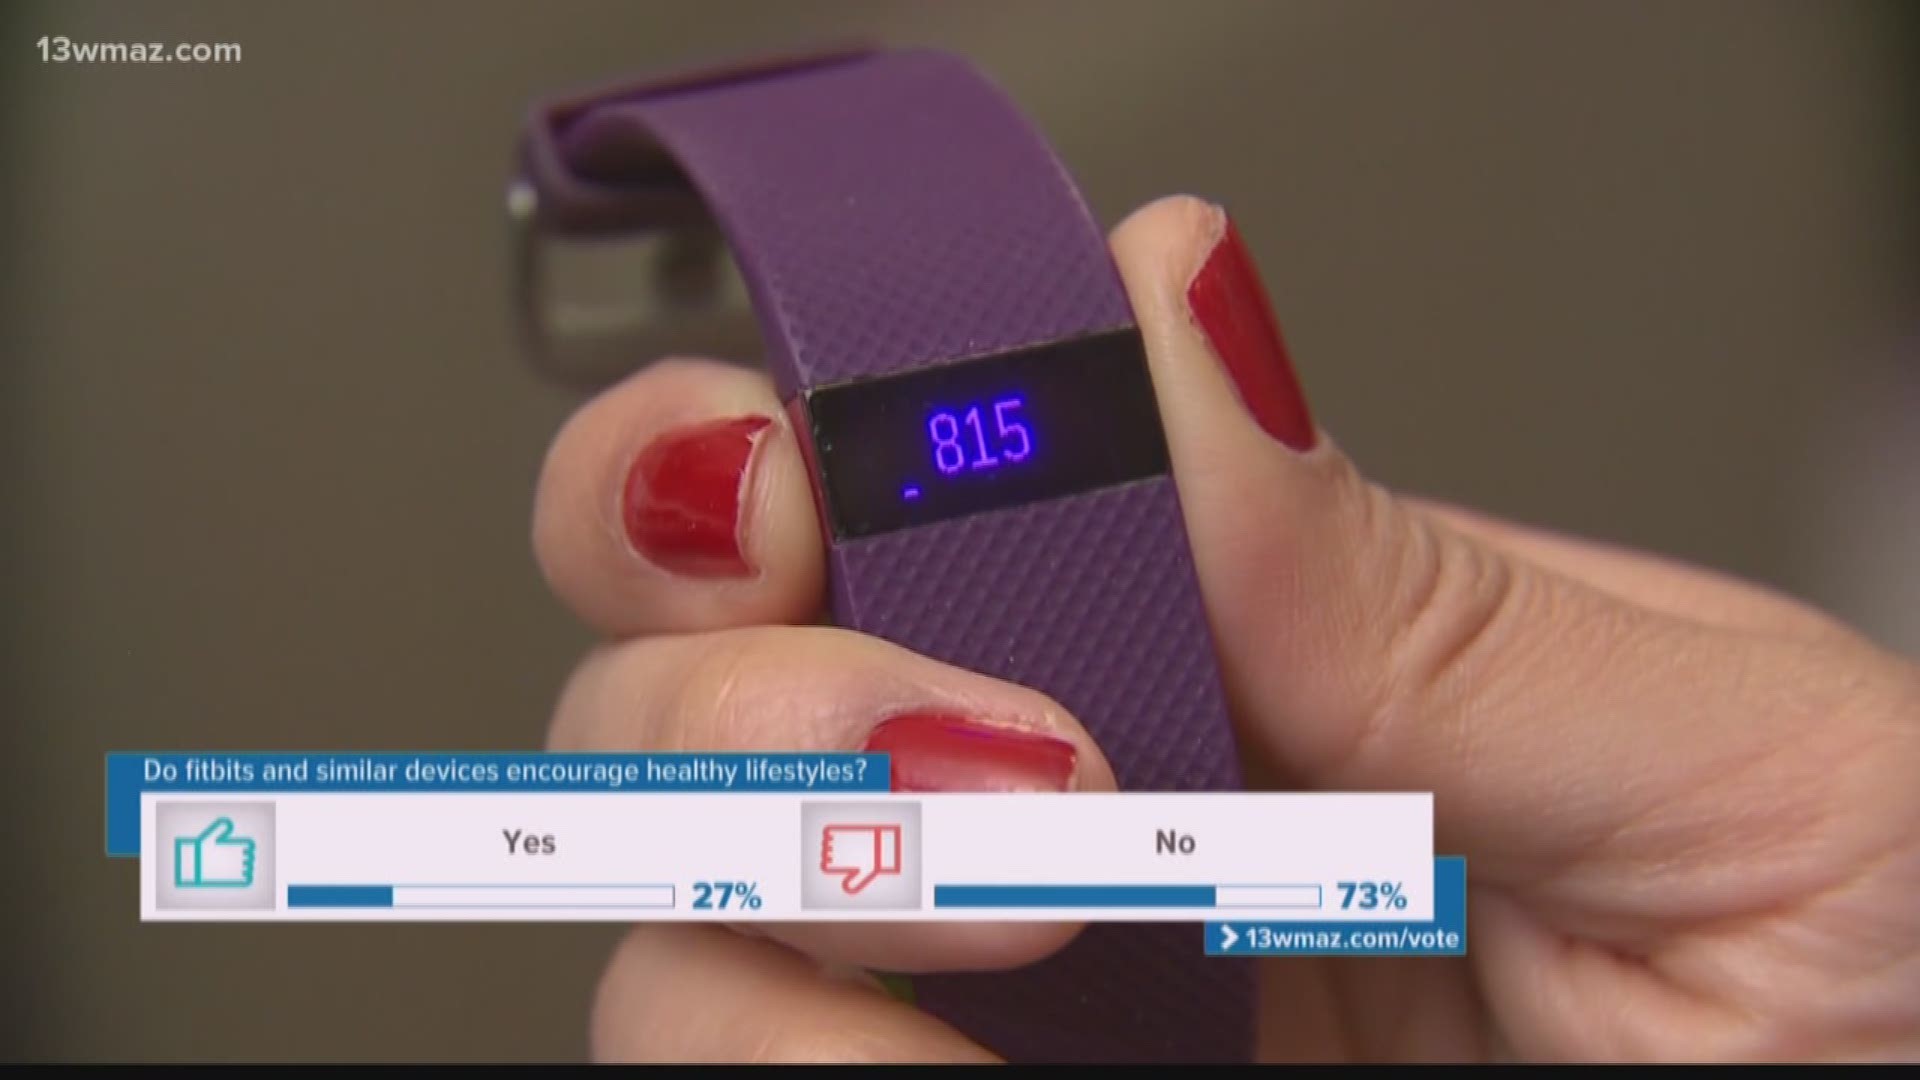 Do Fitbits encourage healthy lifestyles?